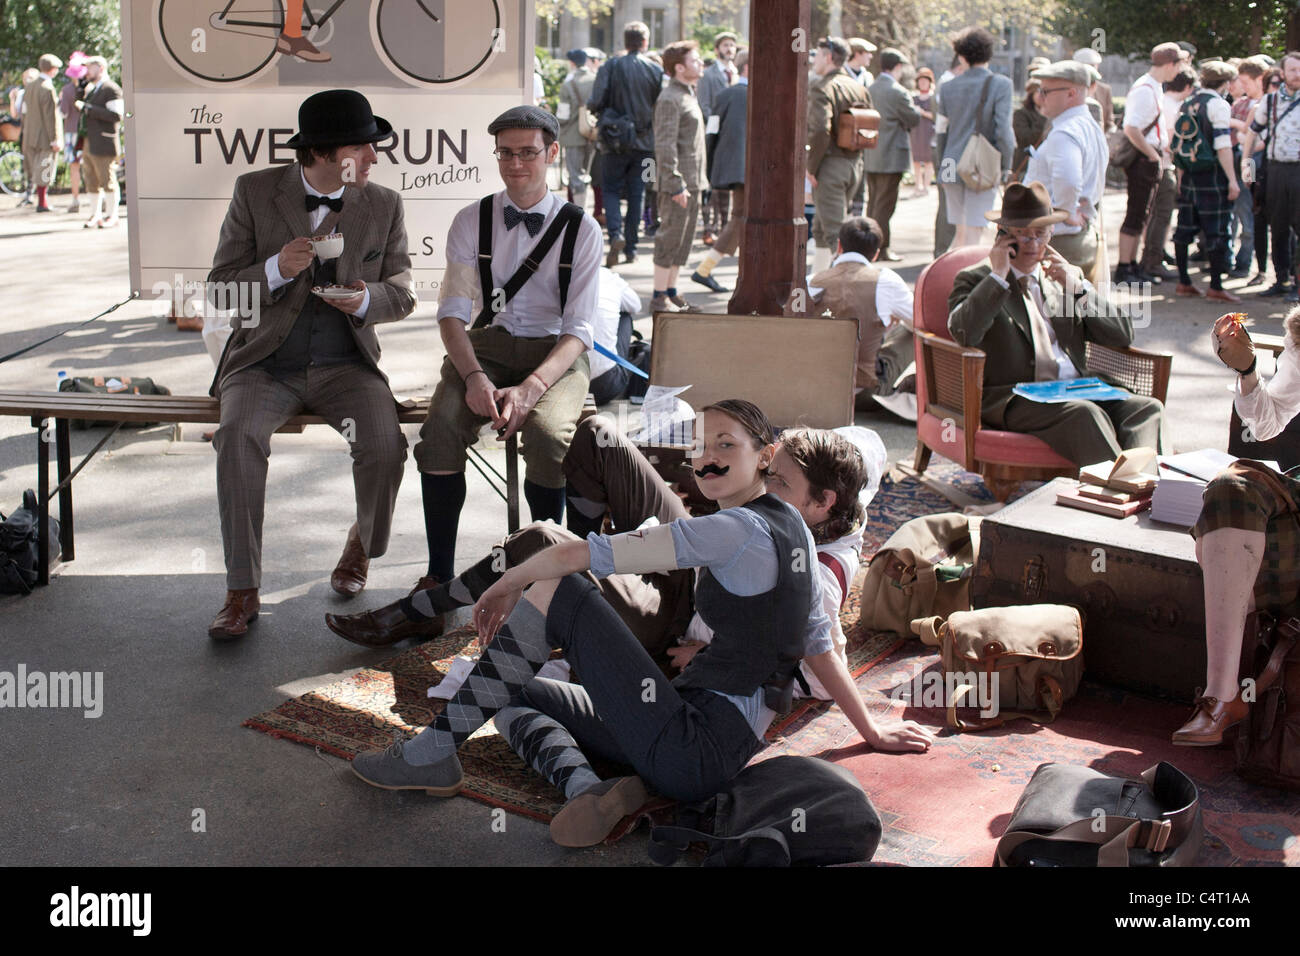 Participants in tweed and flat caps take a tea break during the London Tweed Ride, 2011 Stock Photo